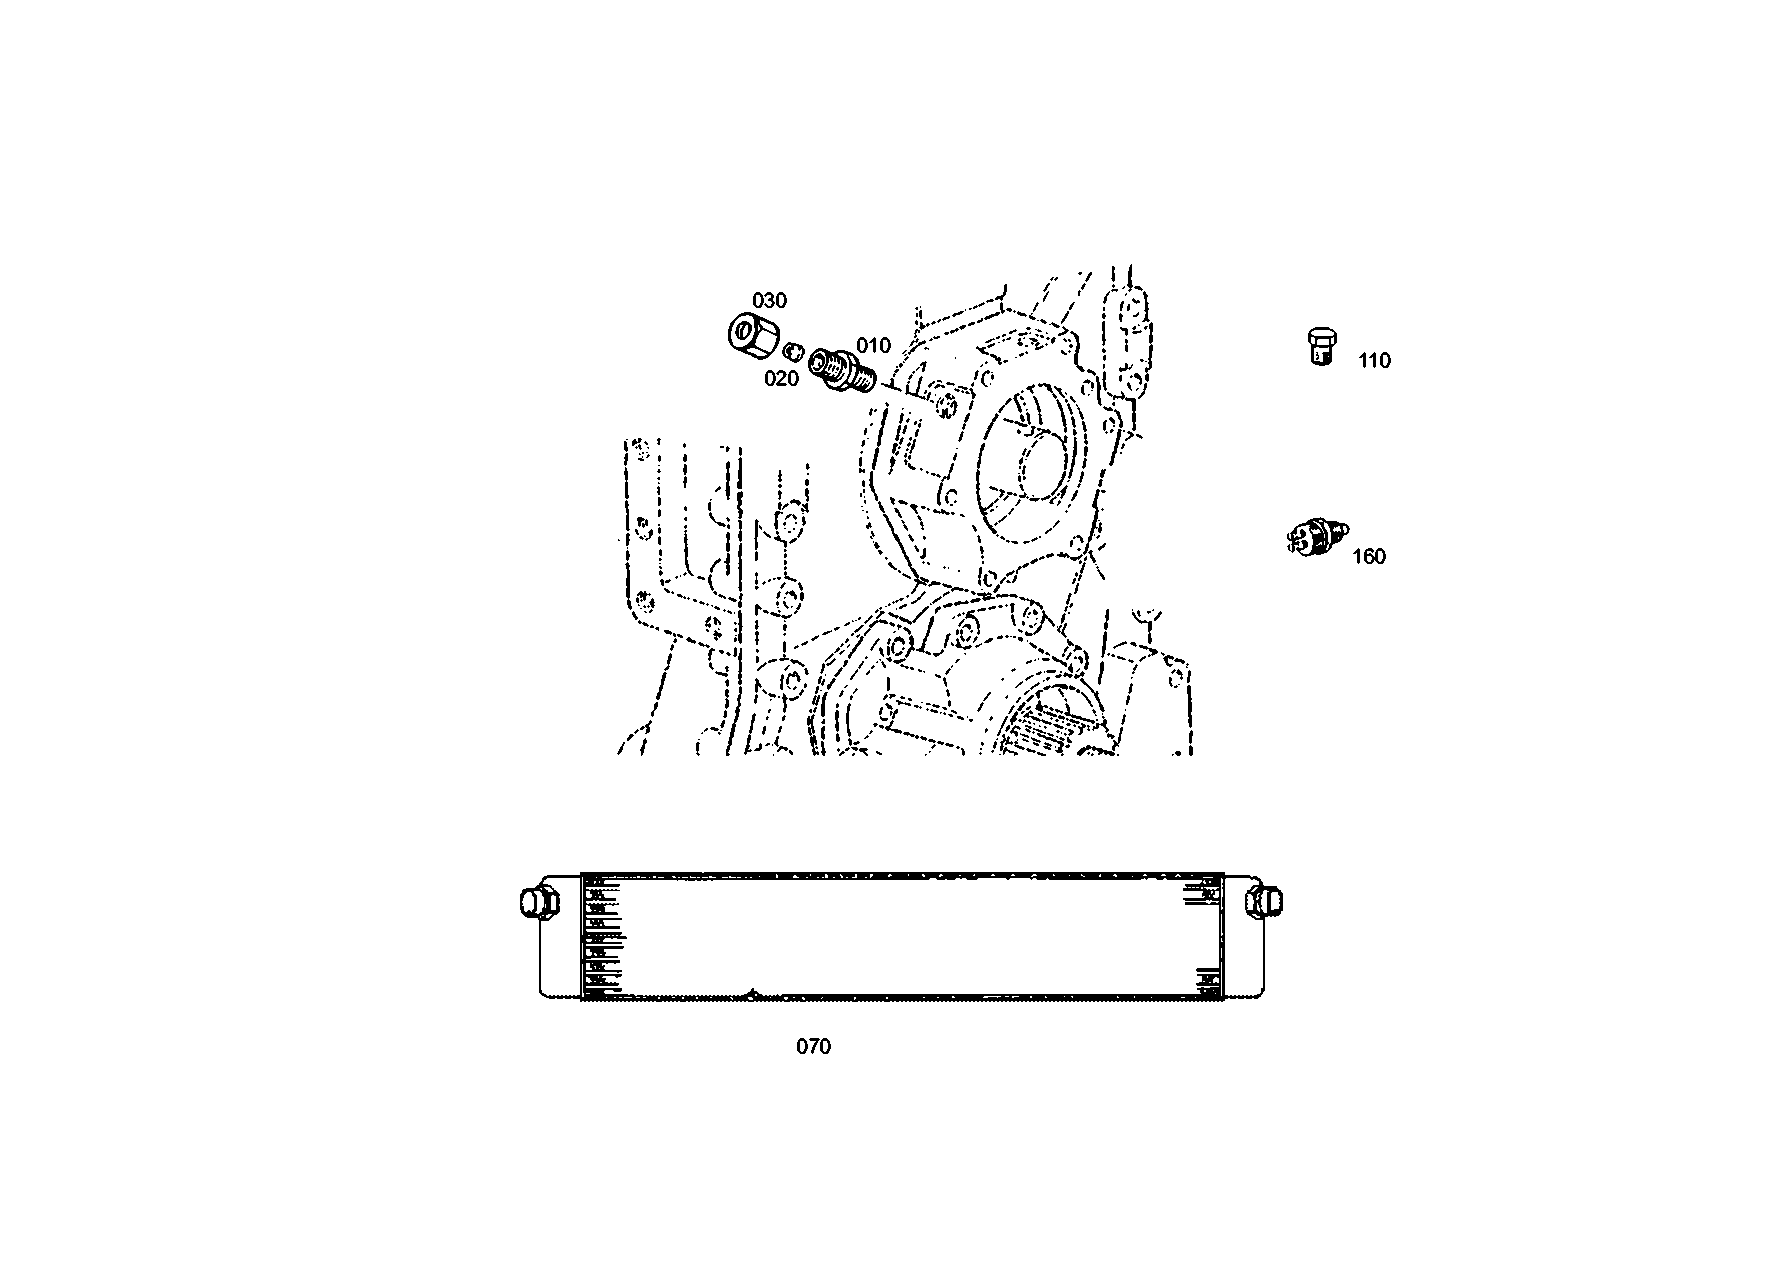 drawing for MARMON Herring MVG751127 - PRESSURE SWITCH (figure 4)